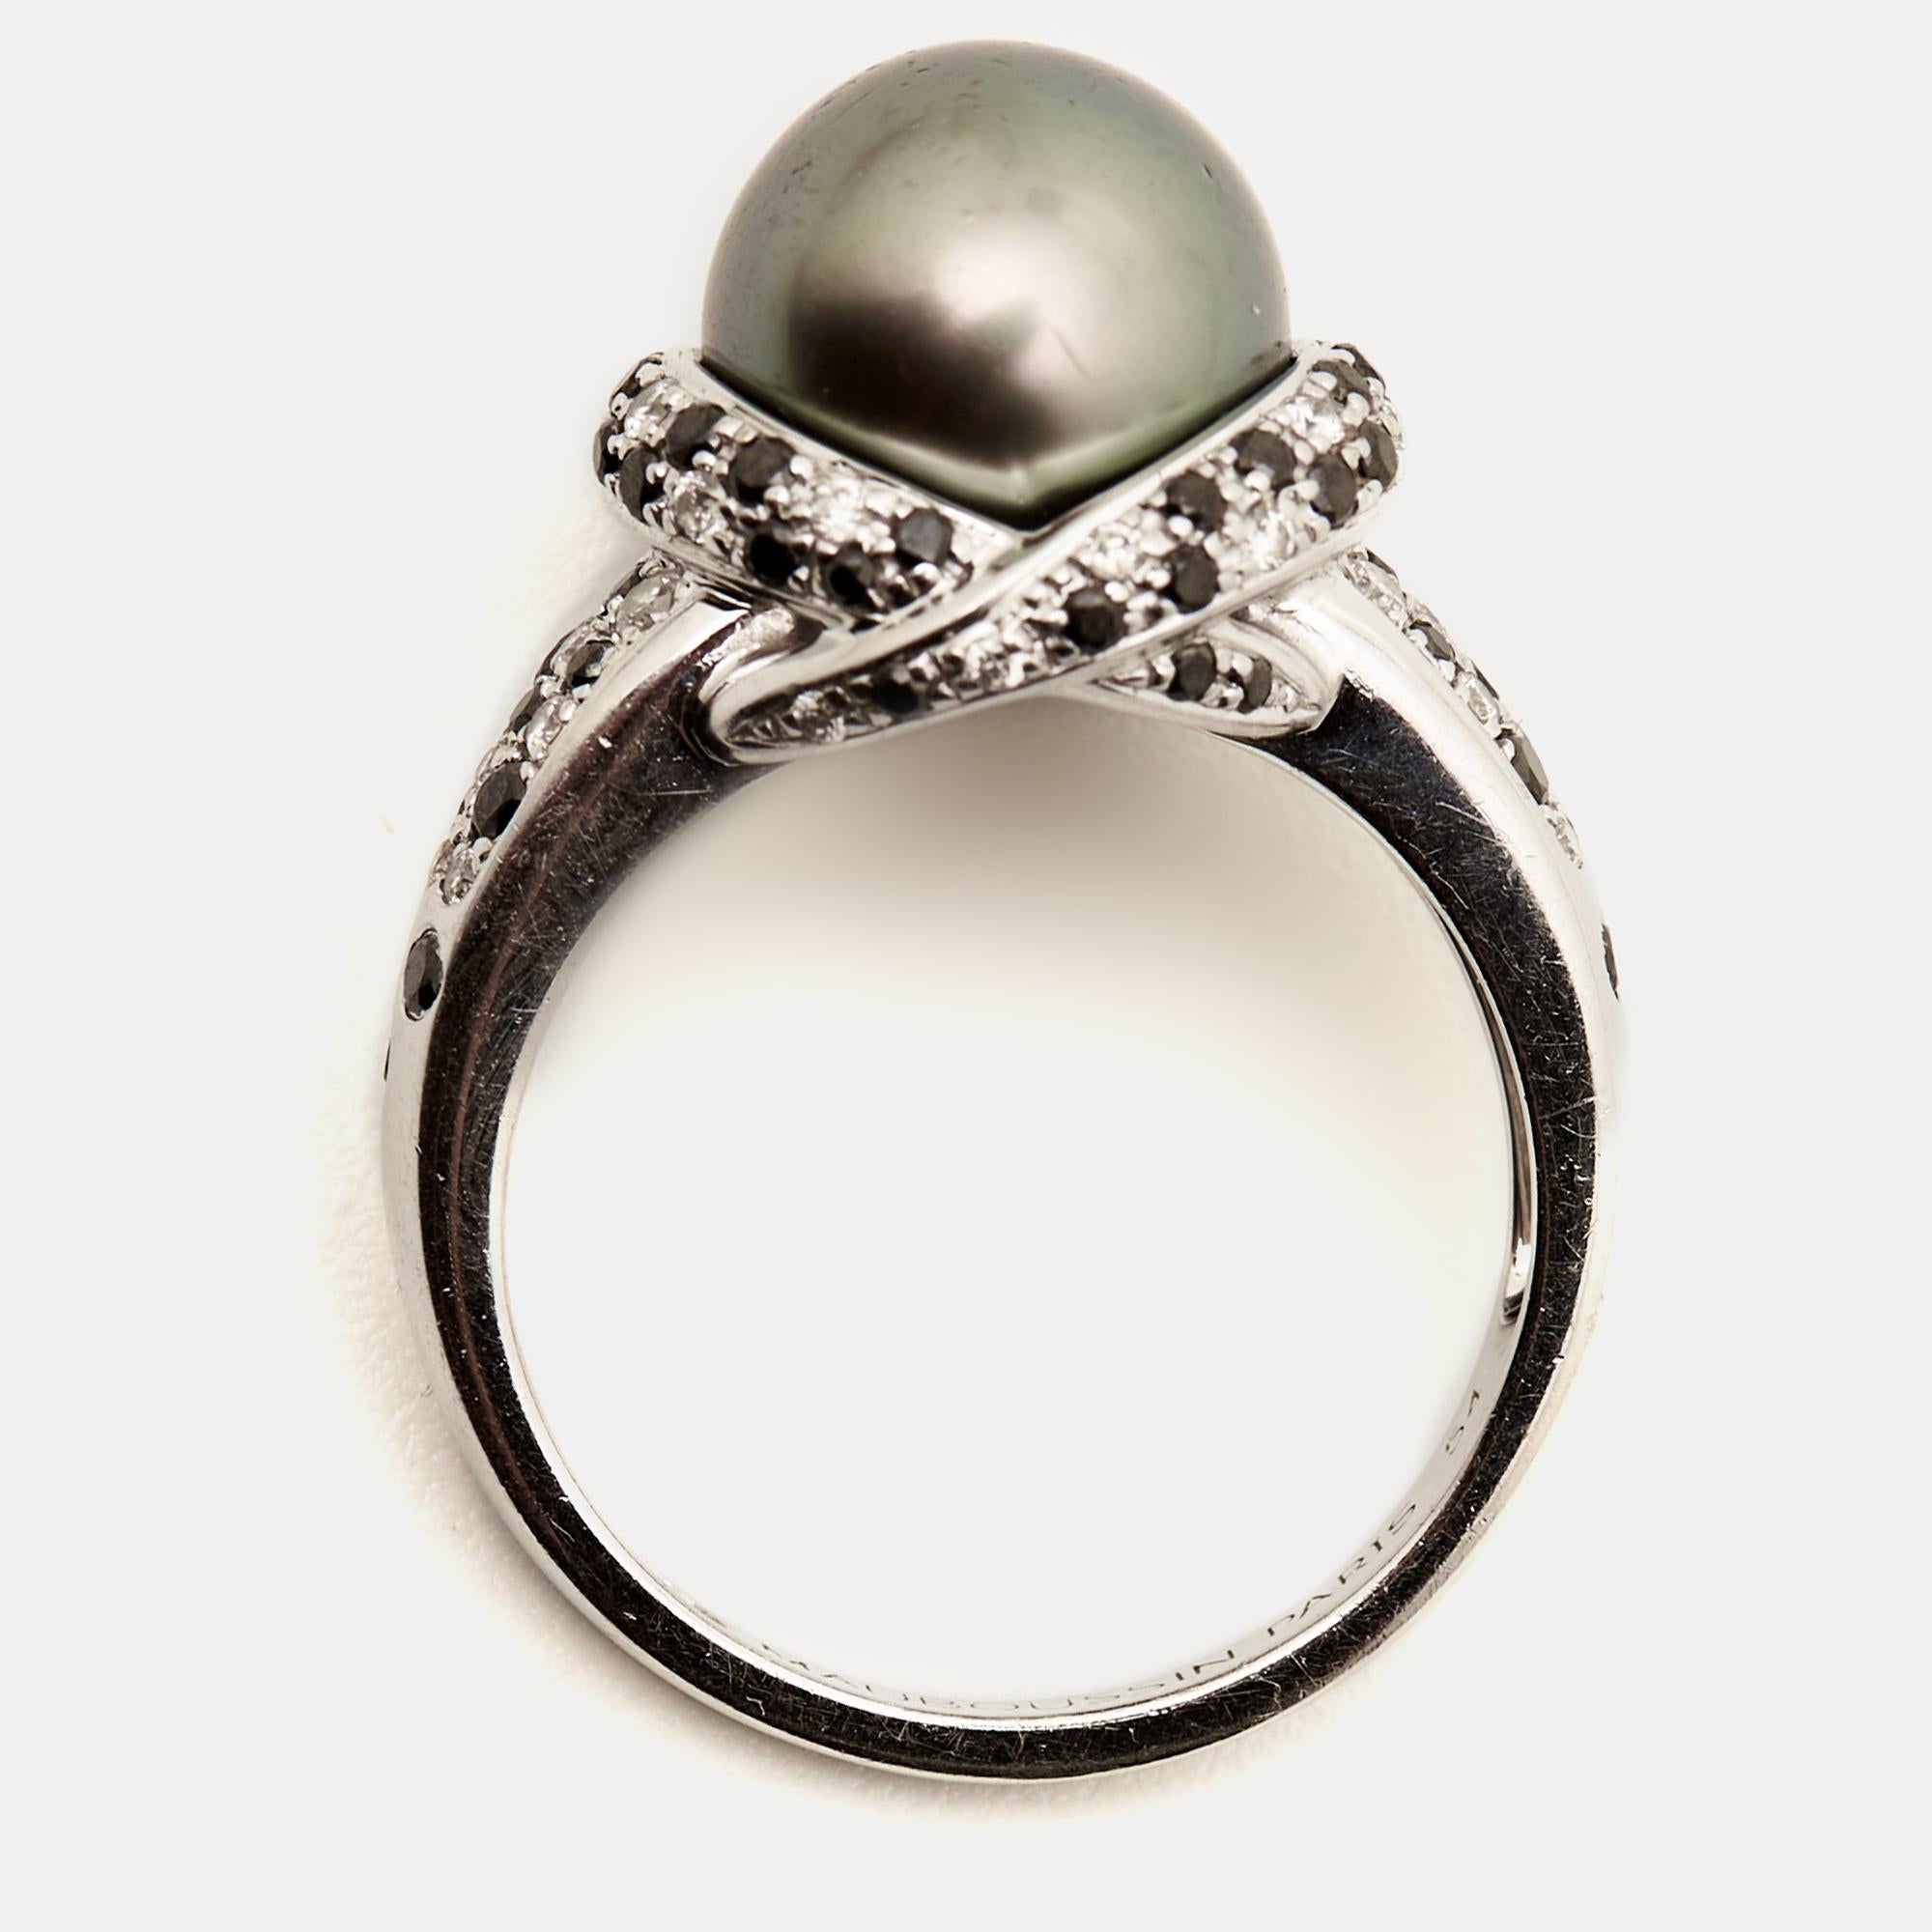 Experience the epitome of luxury and craftsmanship with this meticulously designed Mauboussin pearl ring. Its timeless elegance and exceptional detailing make it a statement piece for any occasion.

